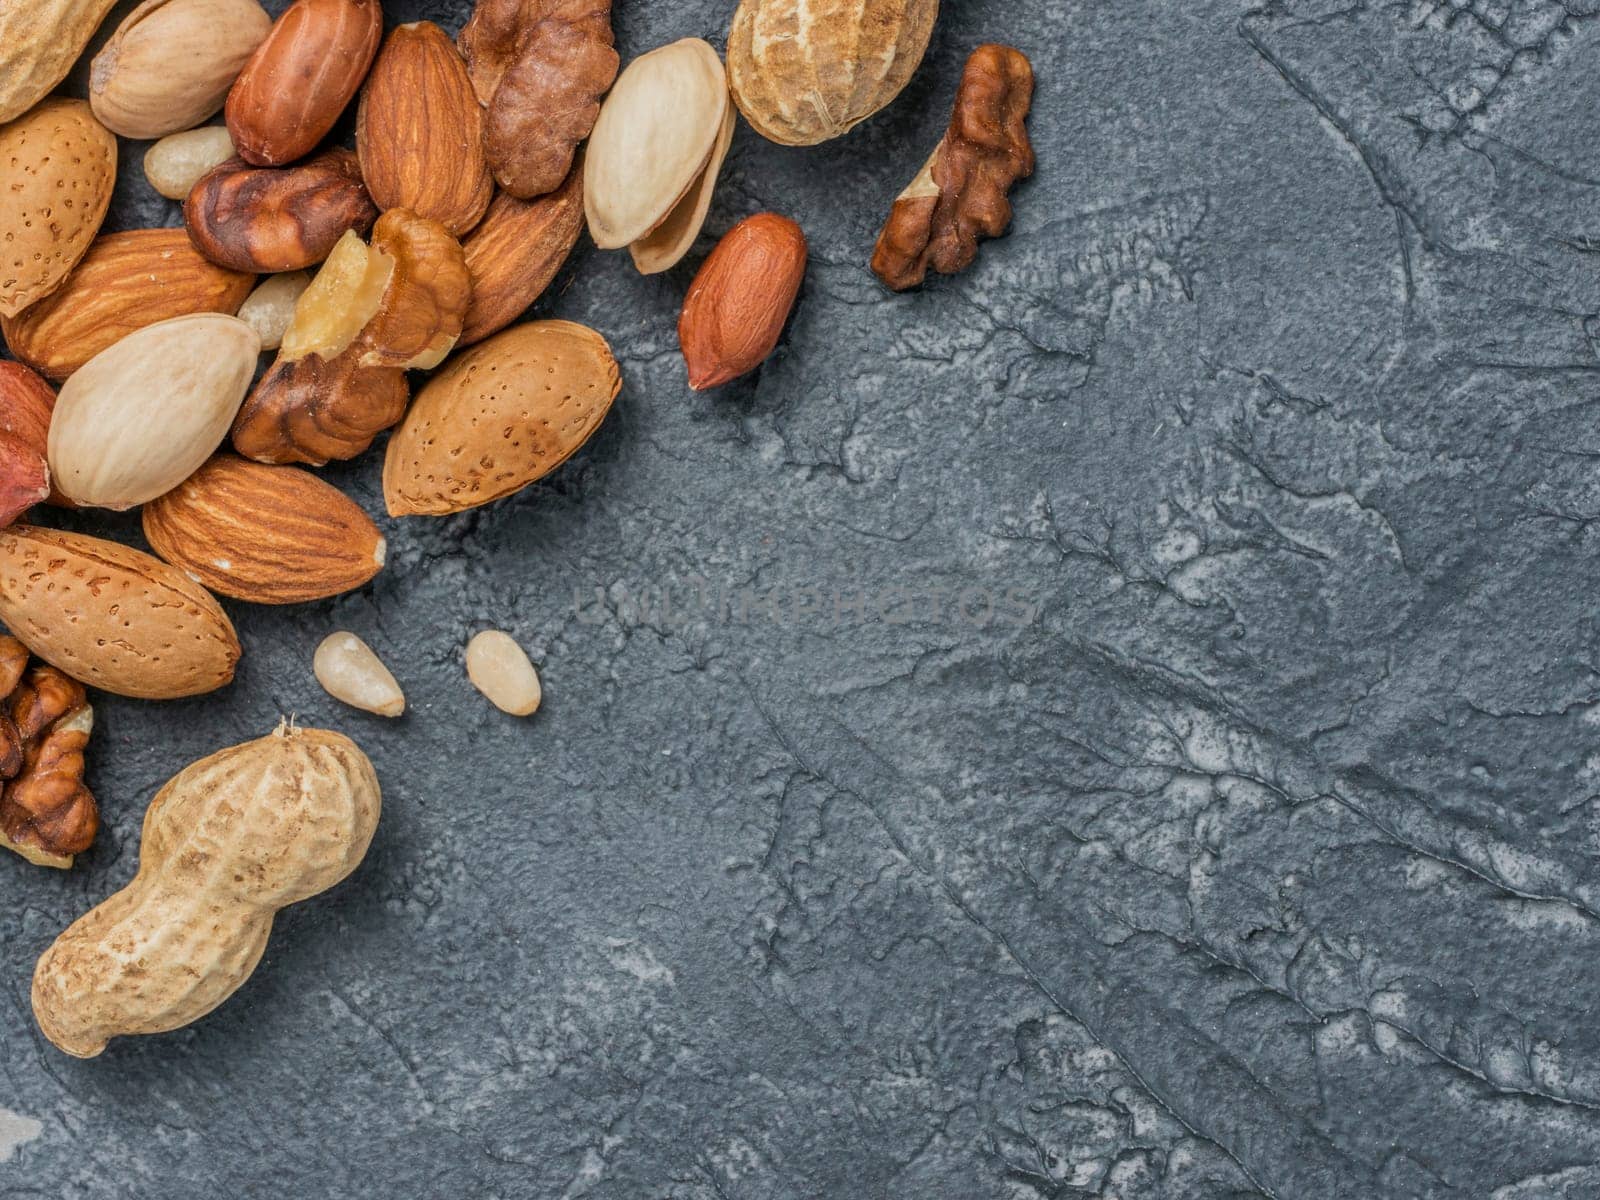 Background of mixed nuts - hazelnuts, walnuts, almonds - on dark concrete background with copy space. Top view or flat lay